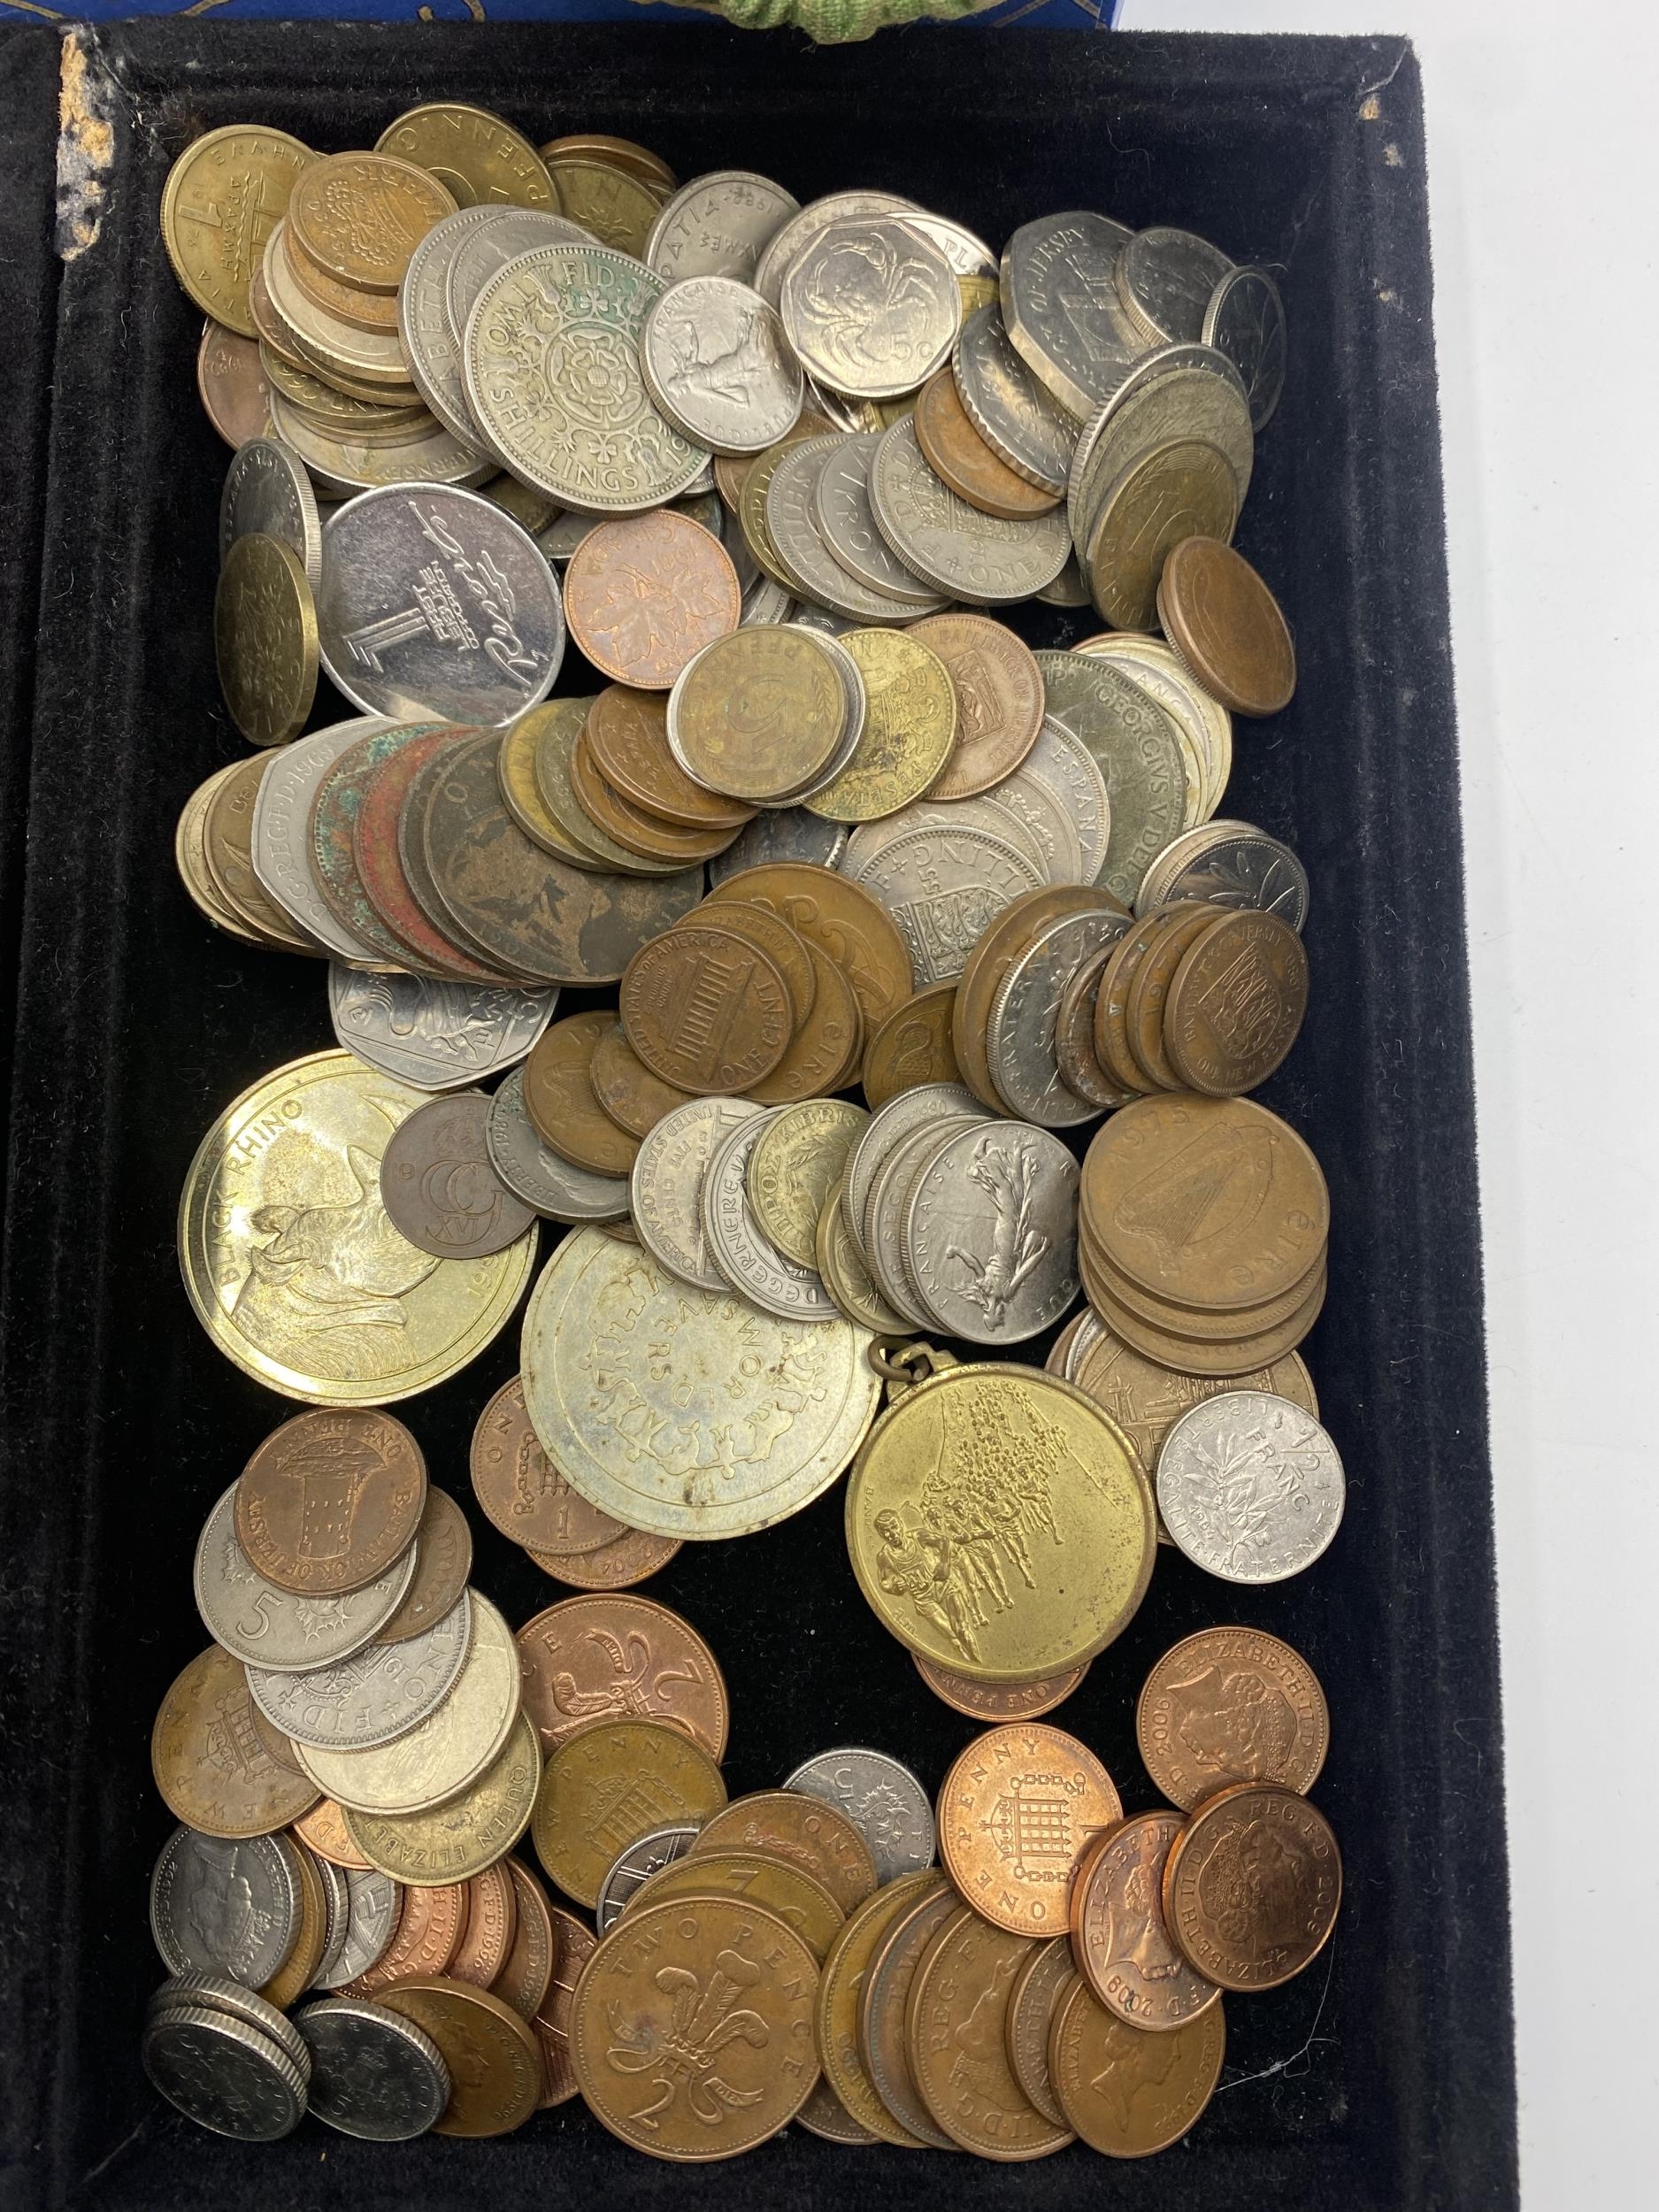 A collection of 19th and 20th century British coinage. - Image 3 of 6